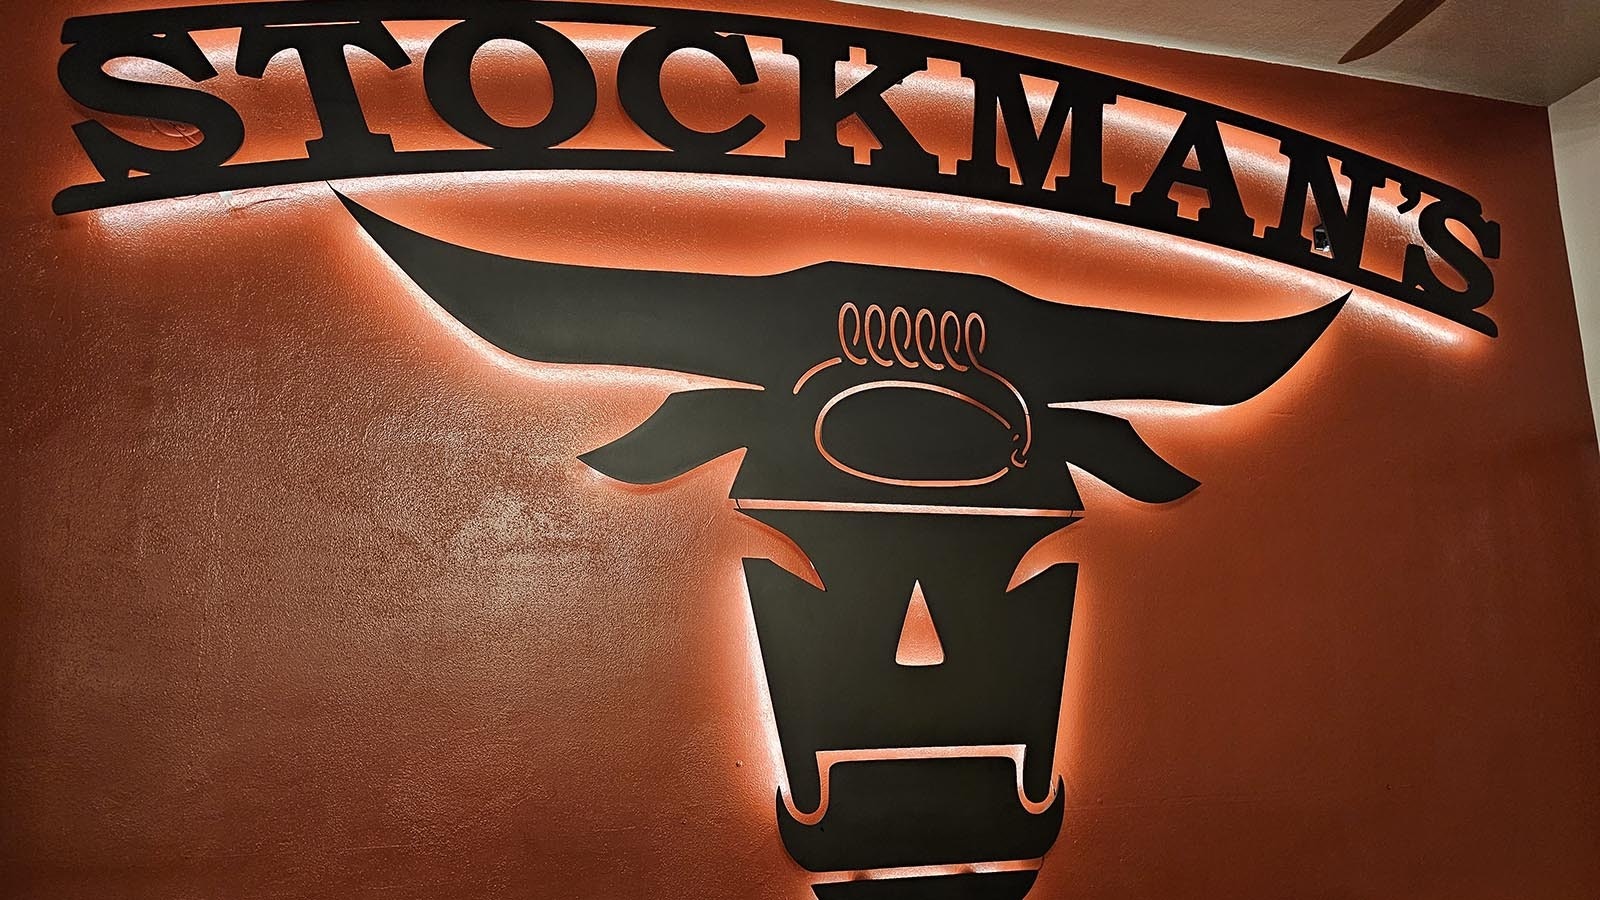 The logo for Stockman's Saloon and Steakhouse decorates an entire wall at Stockman's Saloon and Steakhouse.